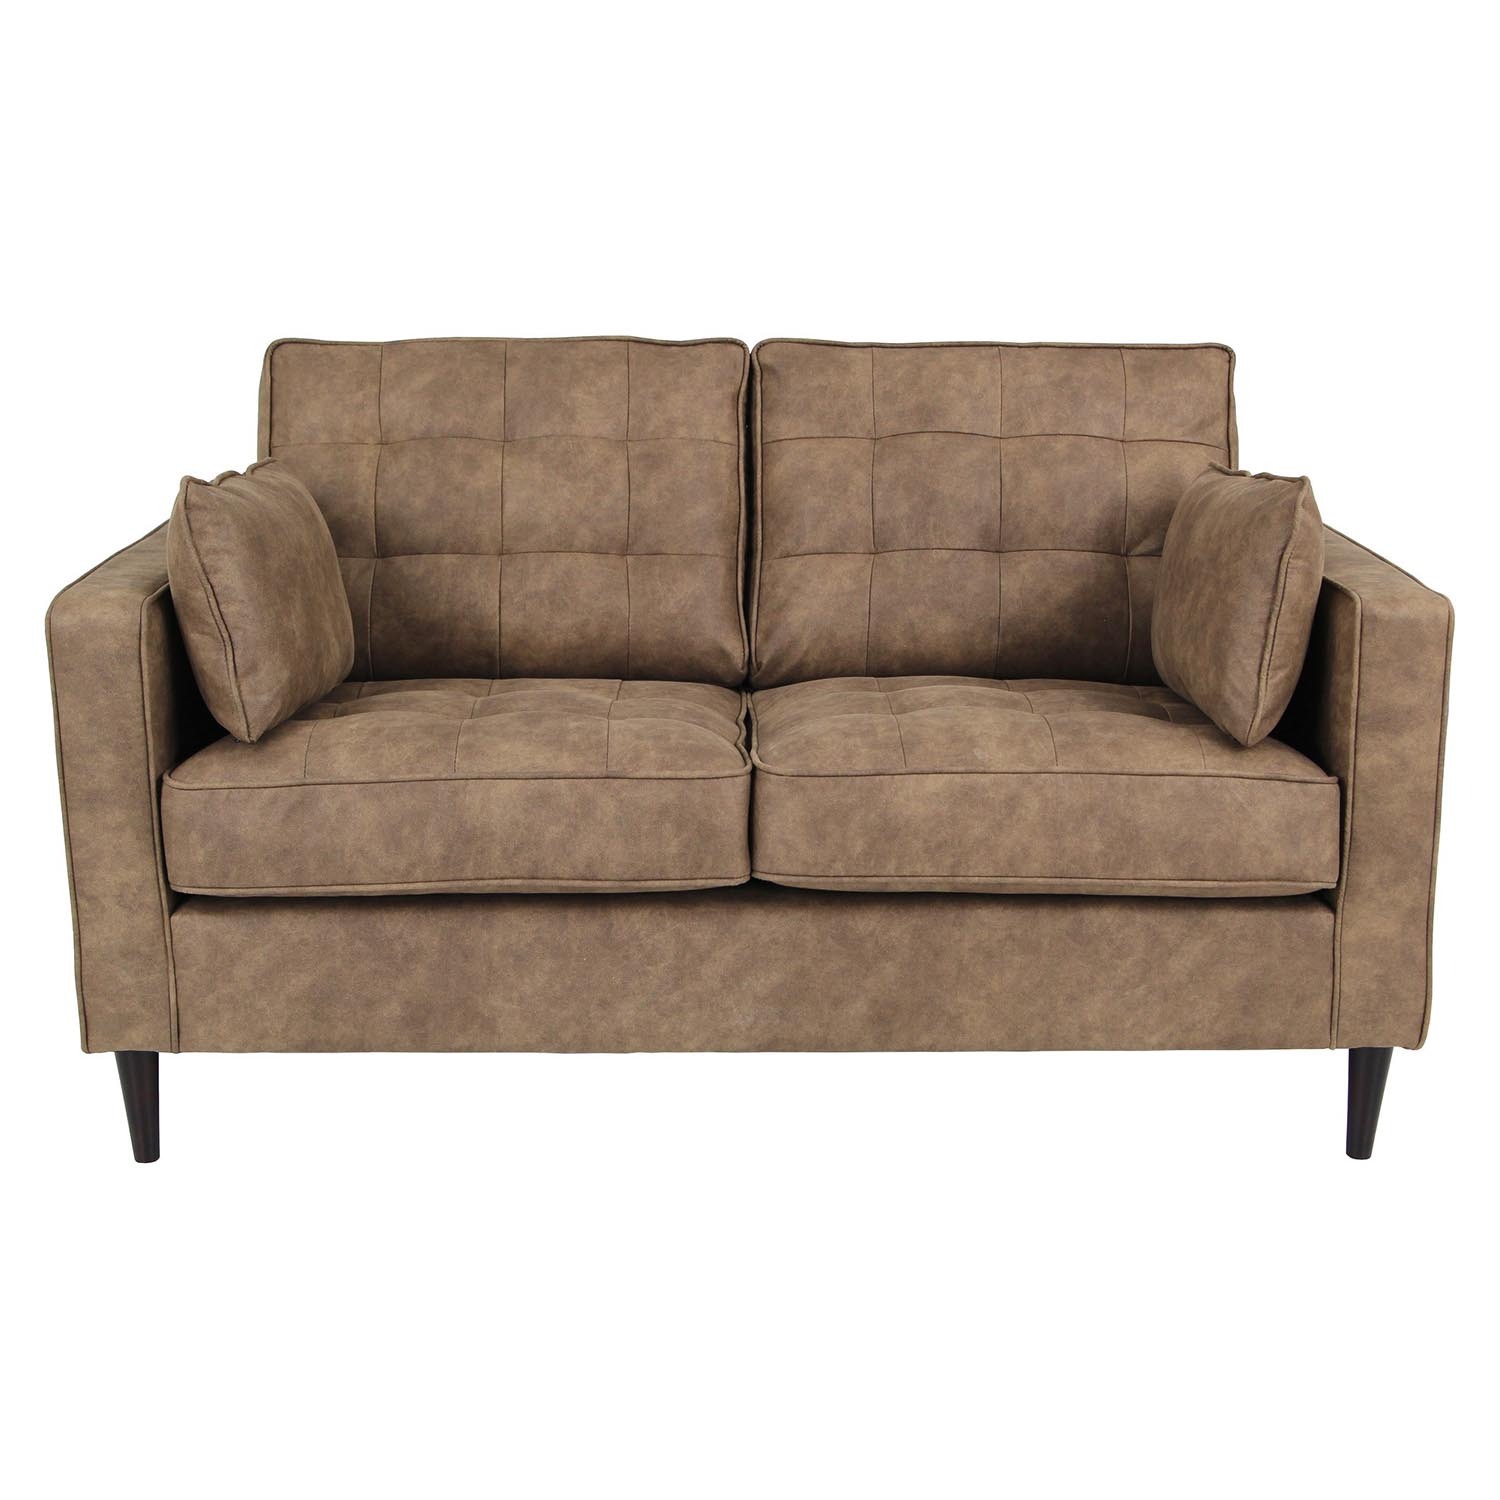 Anabelle 2 Seater Brown Fabric Sofa Image 3